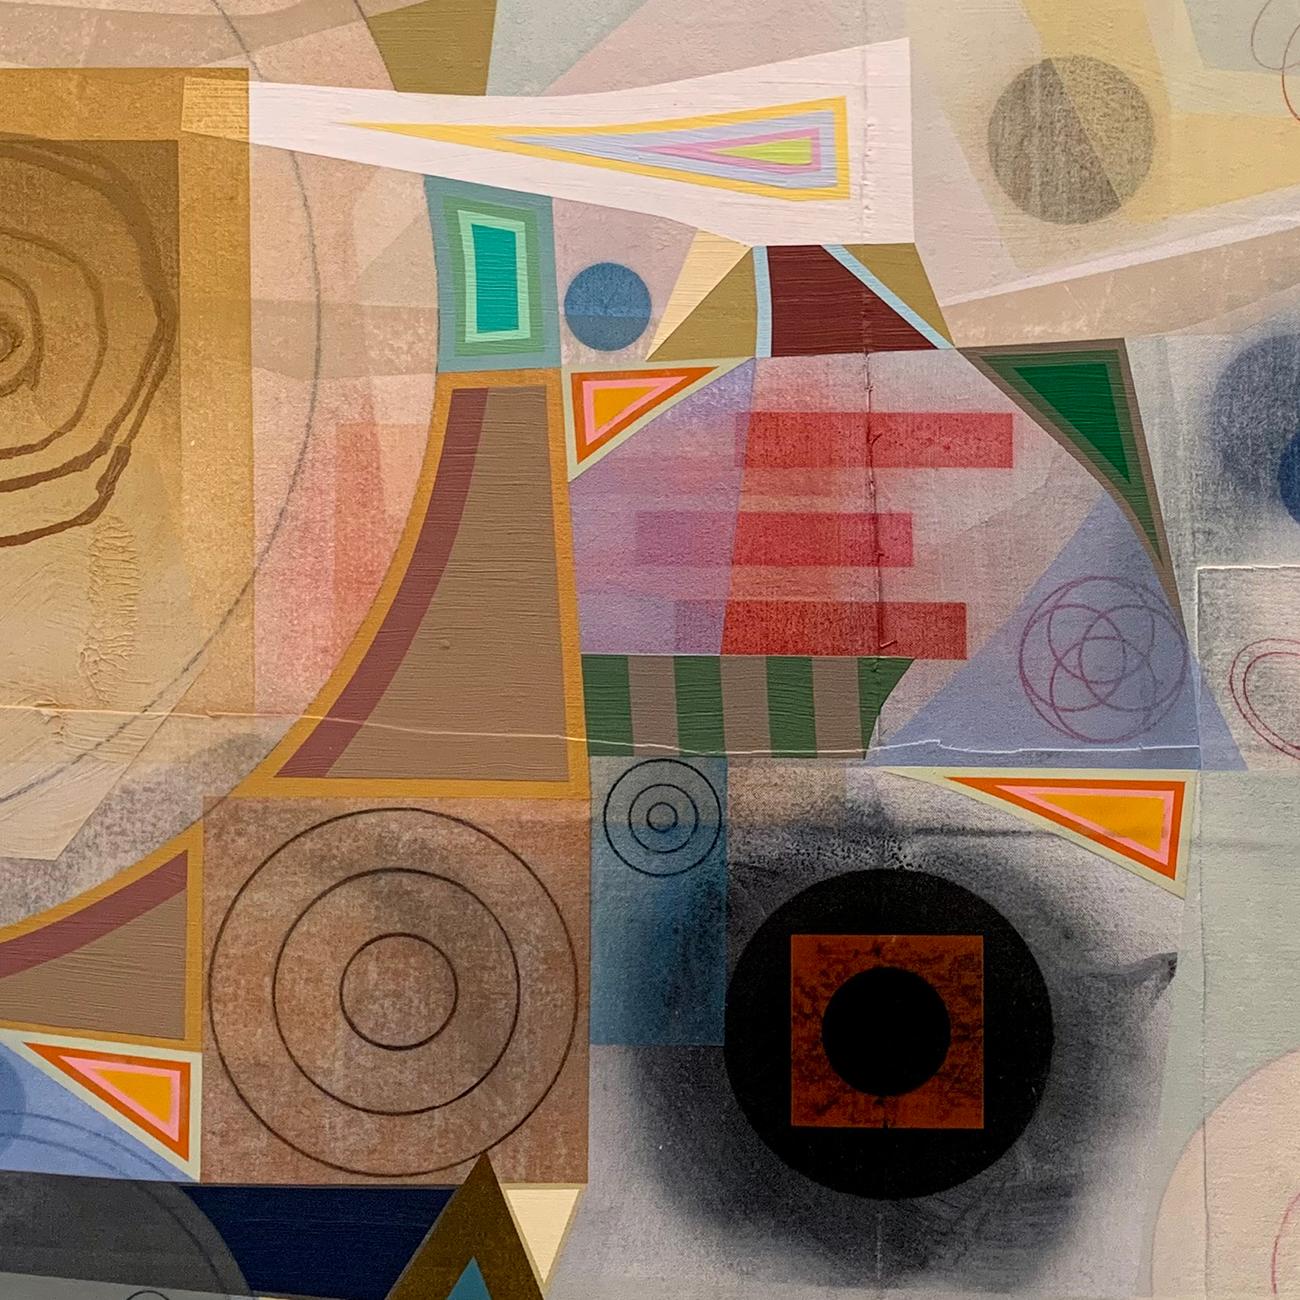 Lost Letters (Circle) (Abstract painting)
Mixed media on canvas — Unframed

Although the initial inspiration for a painting might come from a fleeting experience with music, nature, or a memory, Barringer methodically crafts his compositions over an